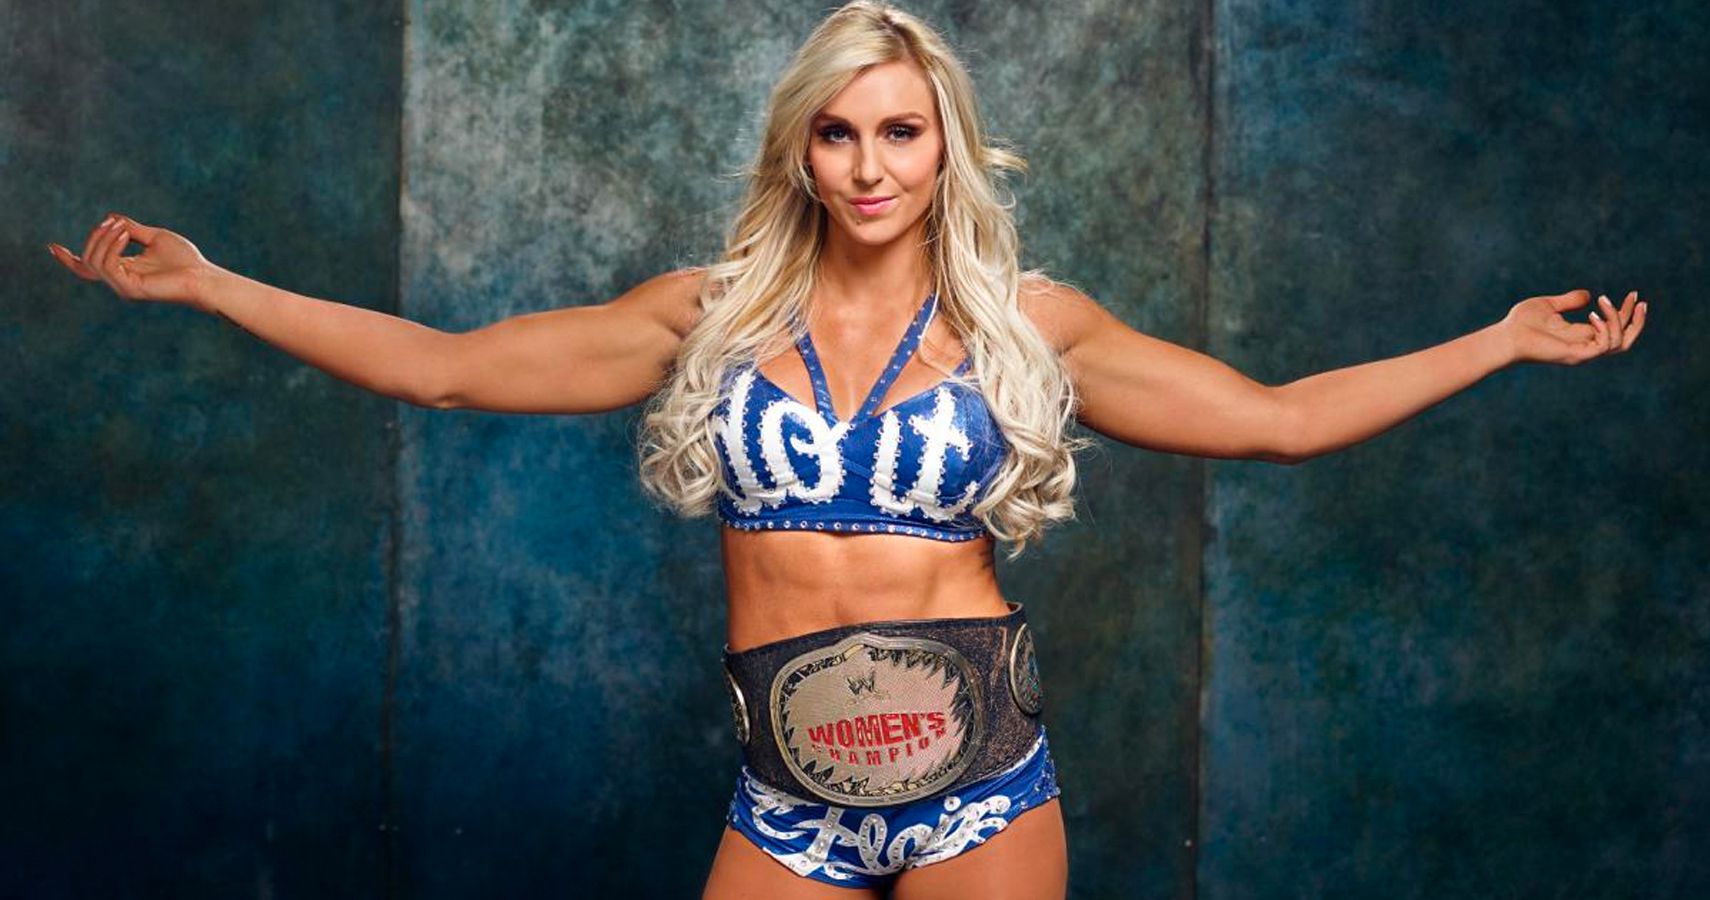 Charlotte Returns To Action, Gives Update on Ric Flair.